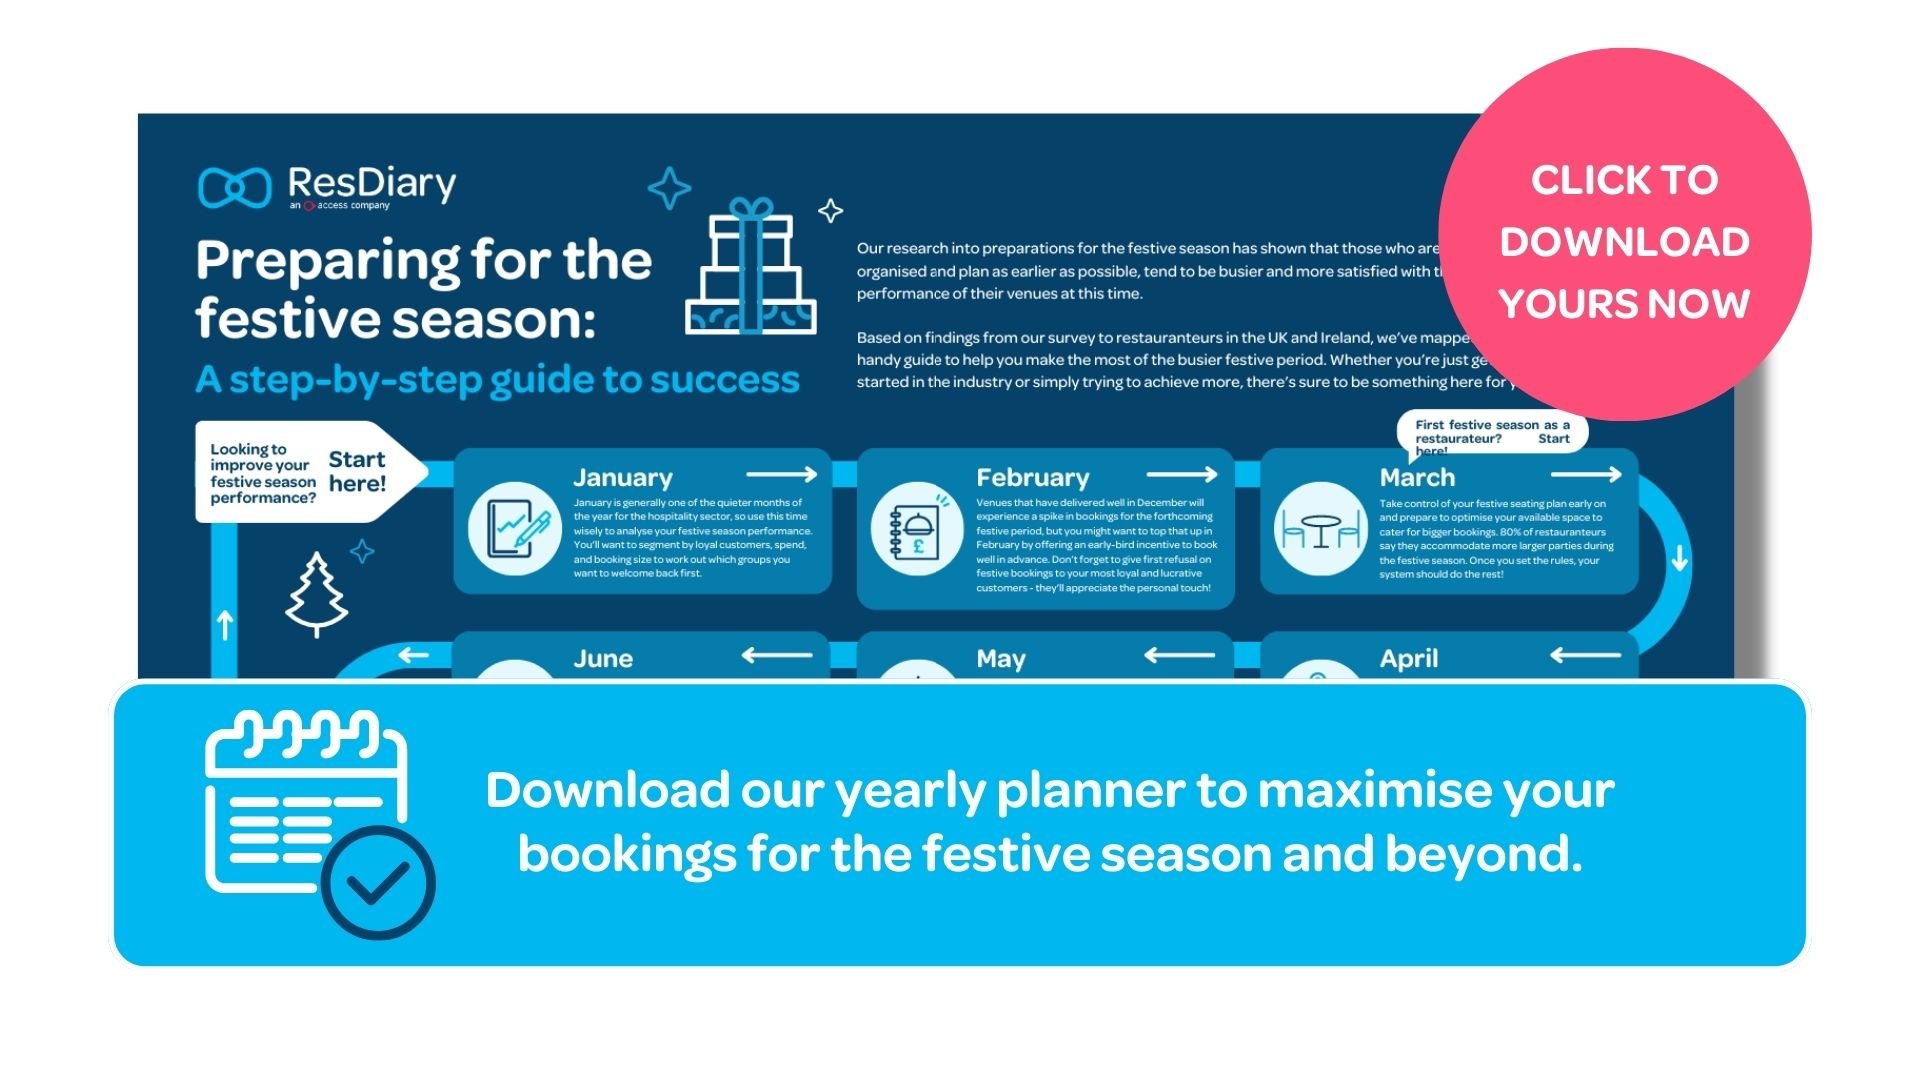 Call to action to download the full ResDiary Festive Season Prep Calendar